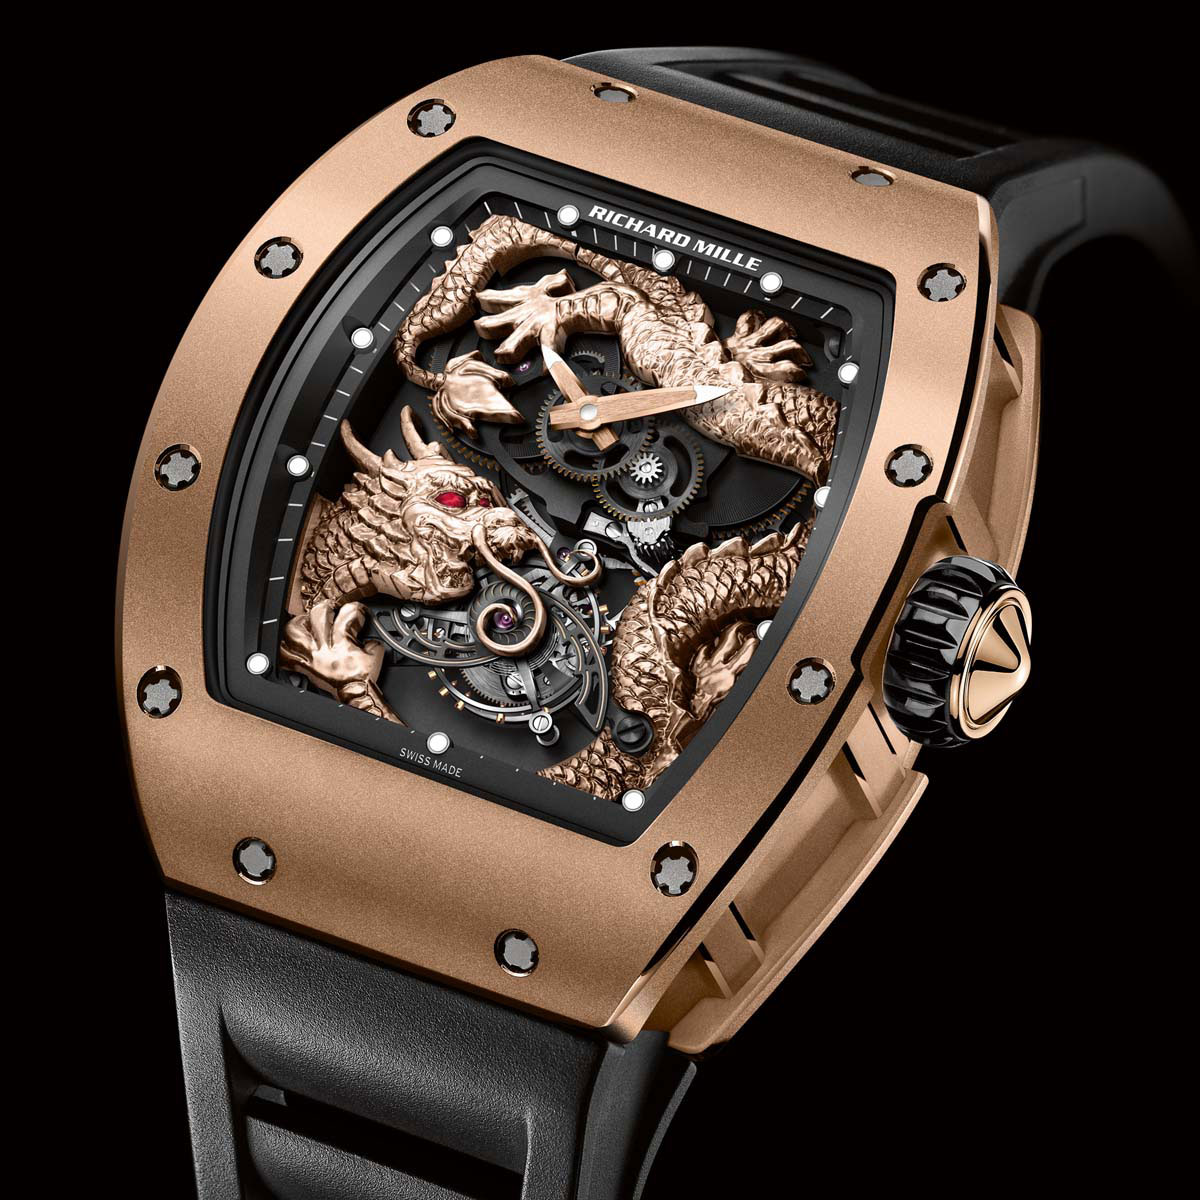 Limited Edition Richard Mille RM 057 Dragon-Jackie Chan Watch